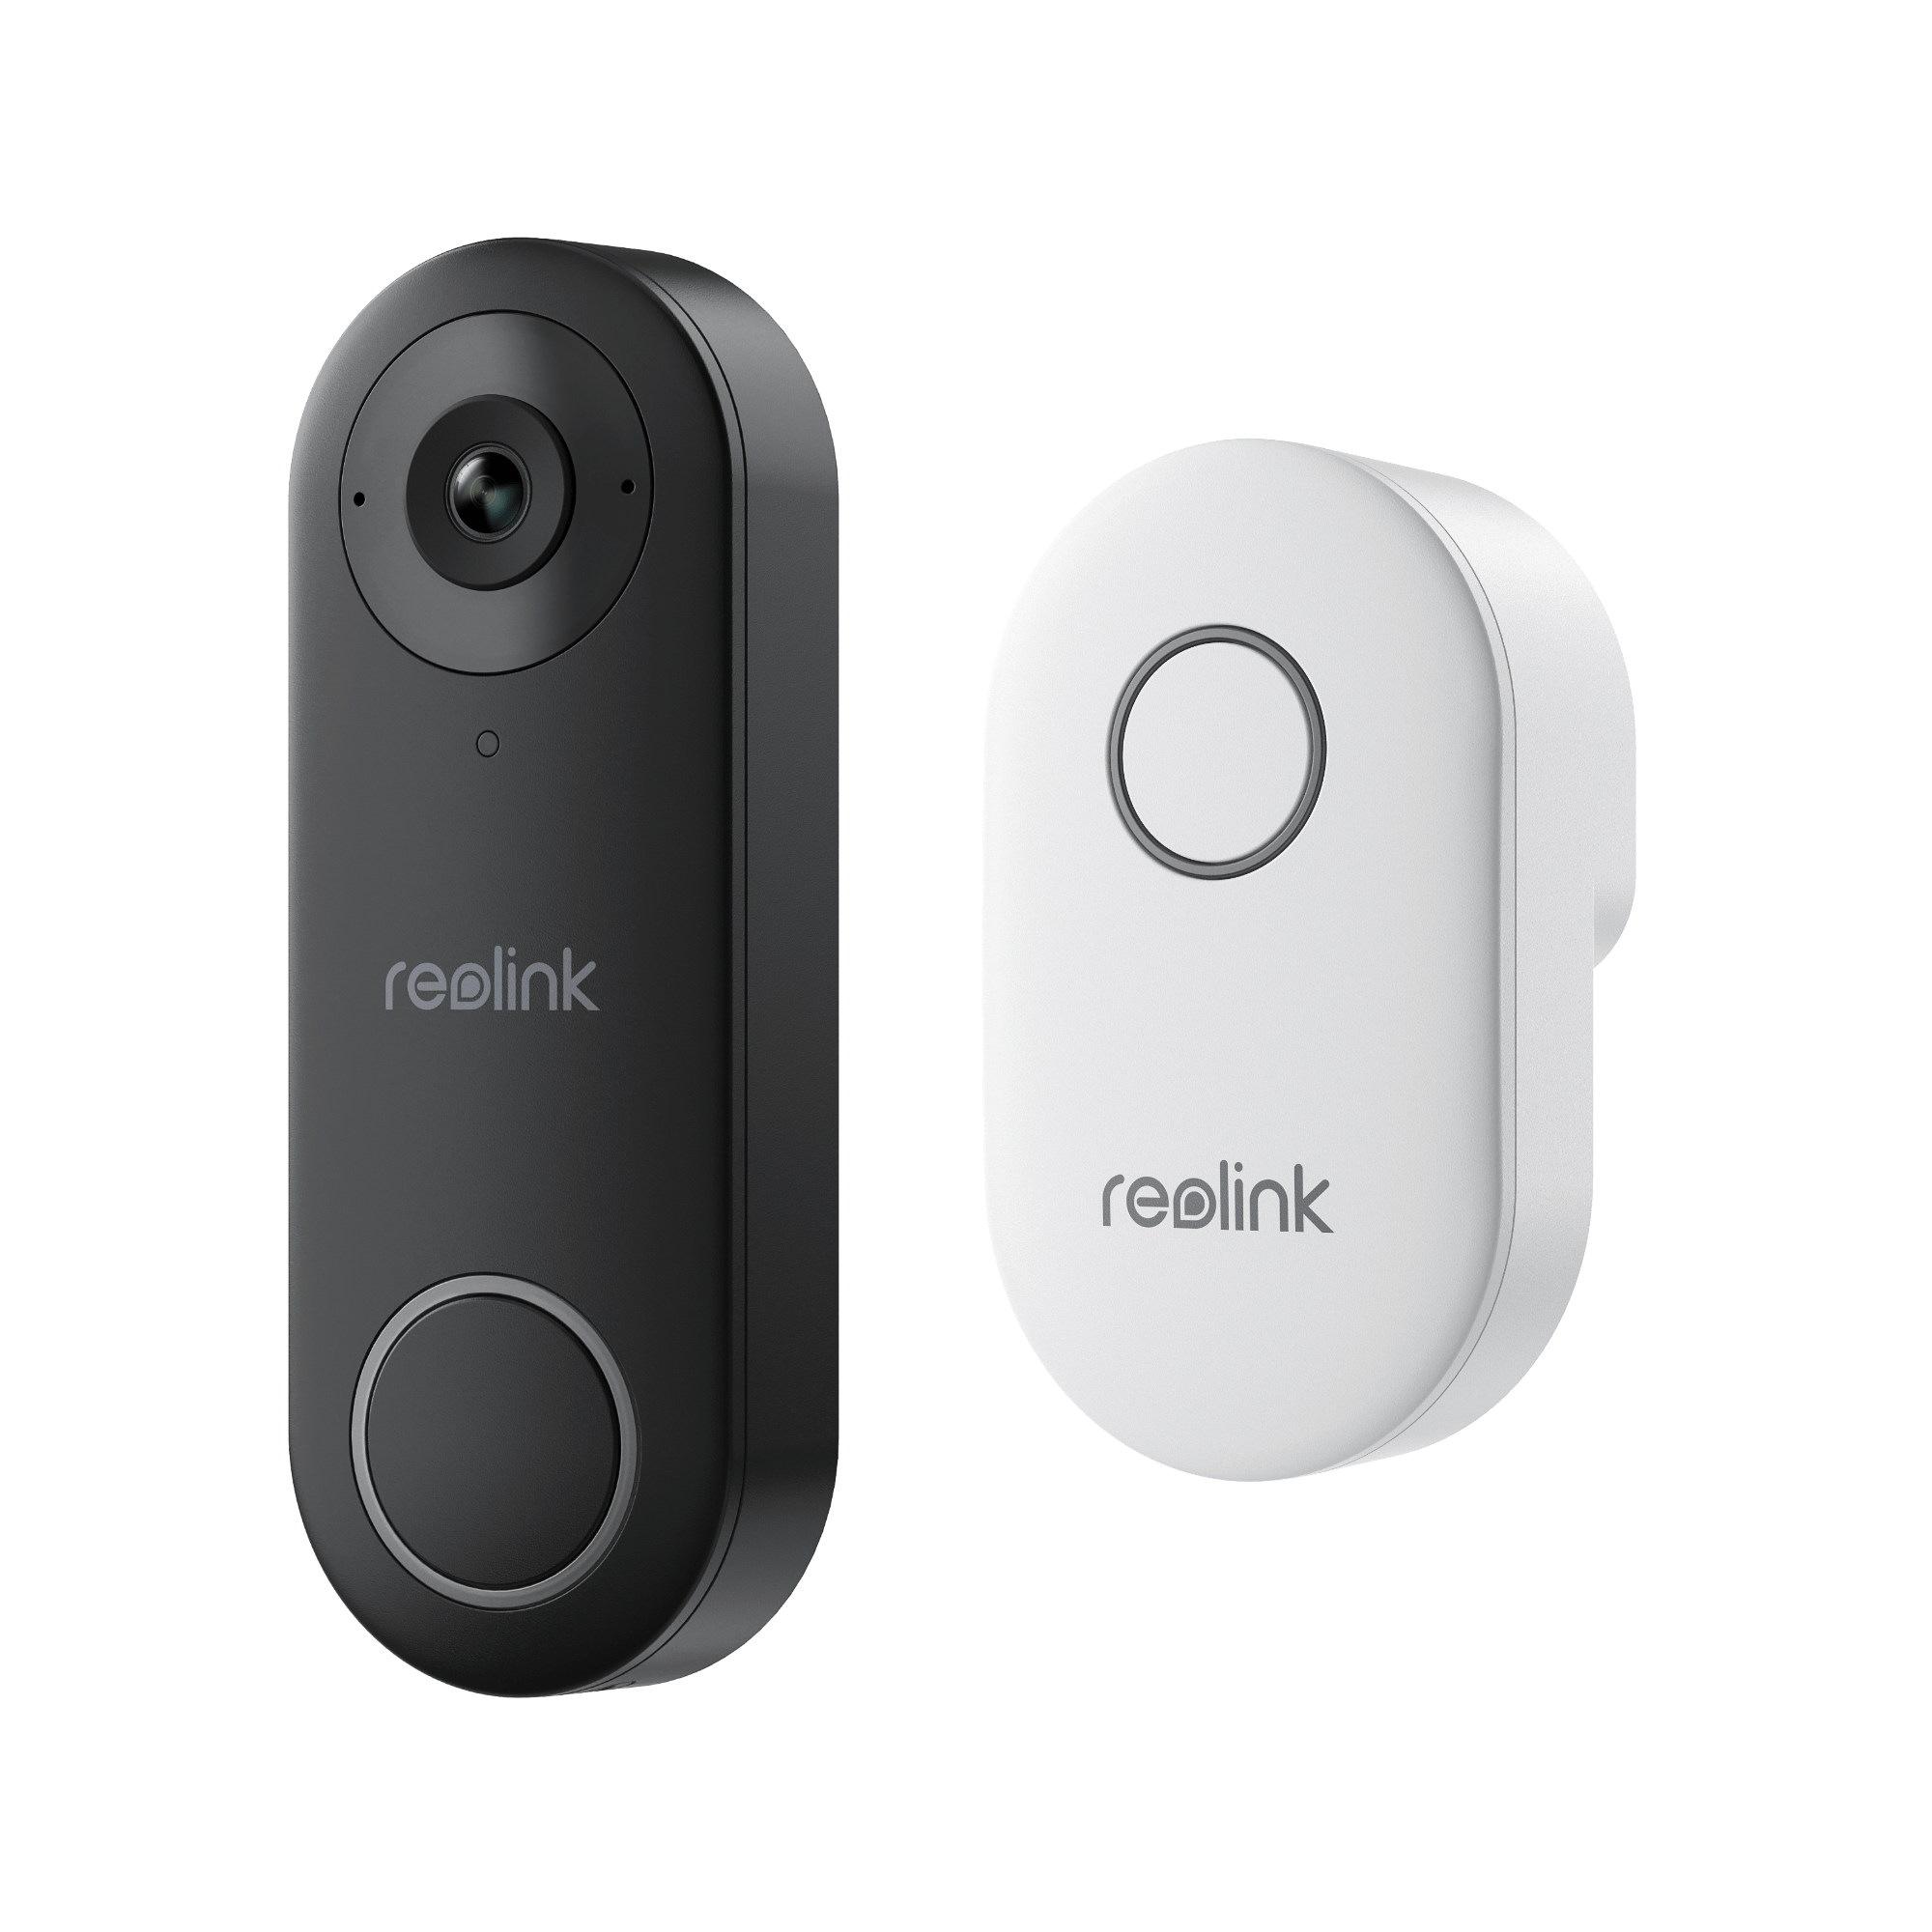 Reolink D340W